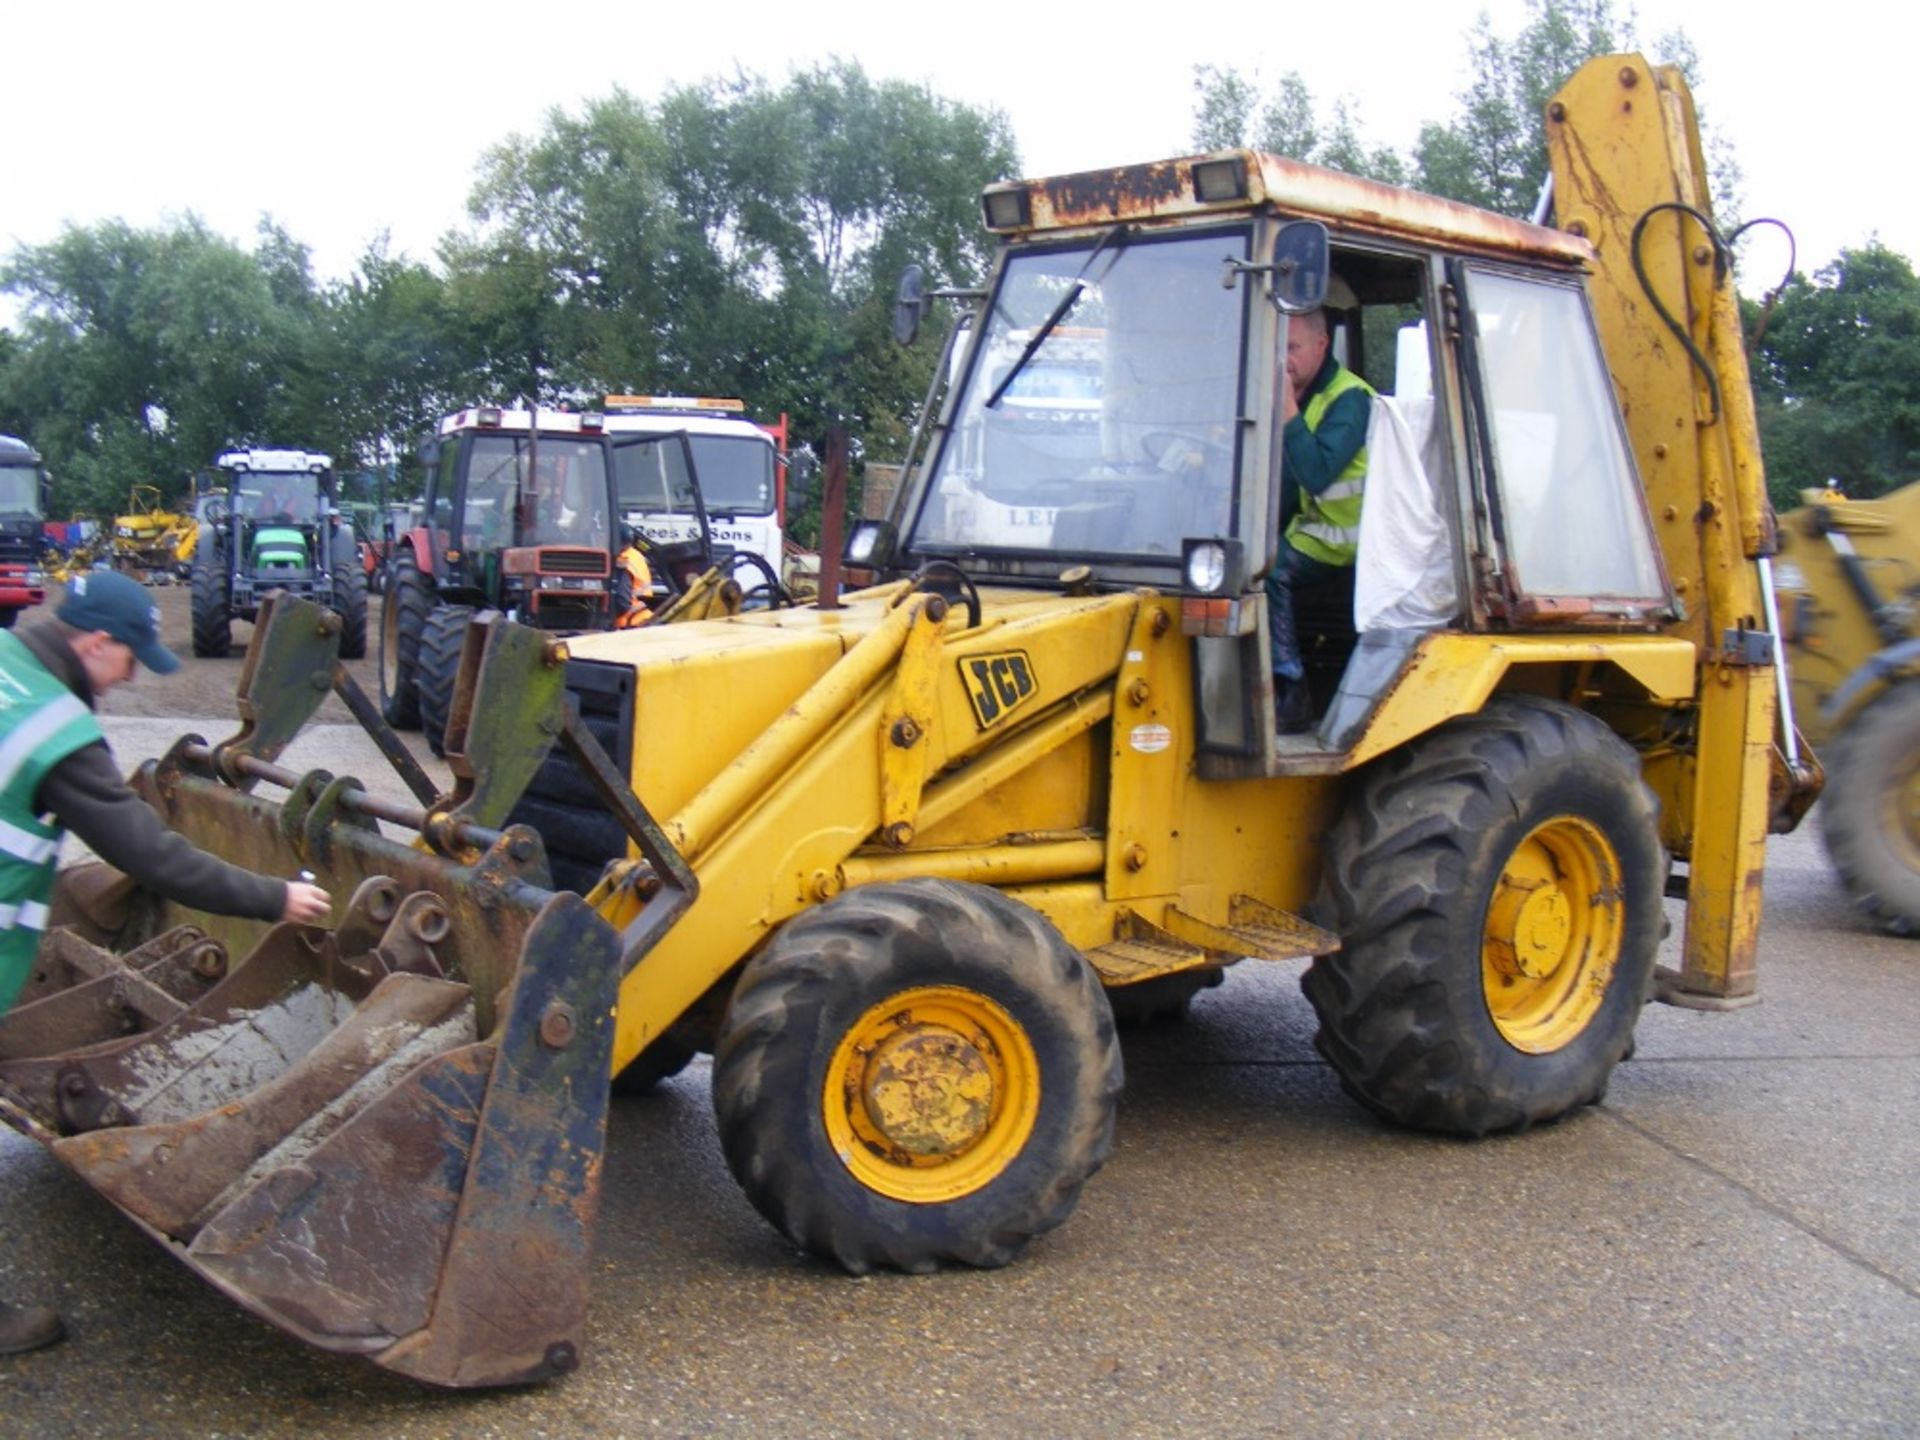 JCB 3CX Turbo Digger Loader with 5 Stud Rear Axle, 4 in 1 Extender, 3no. Buckets & Pallet Tines.